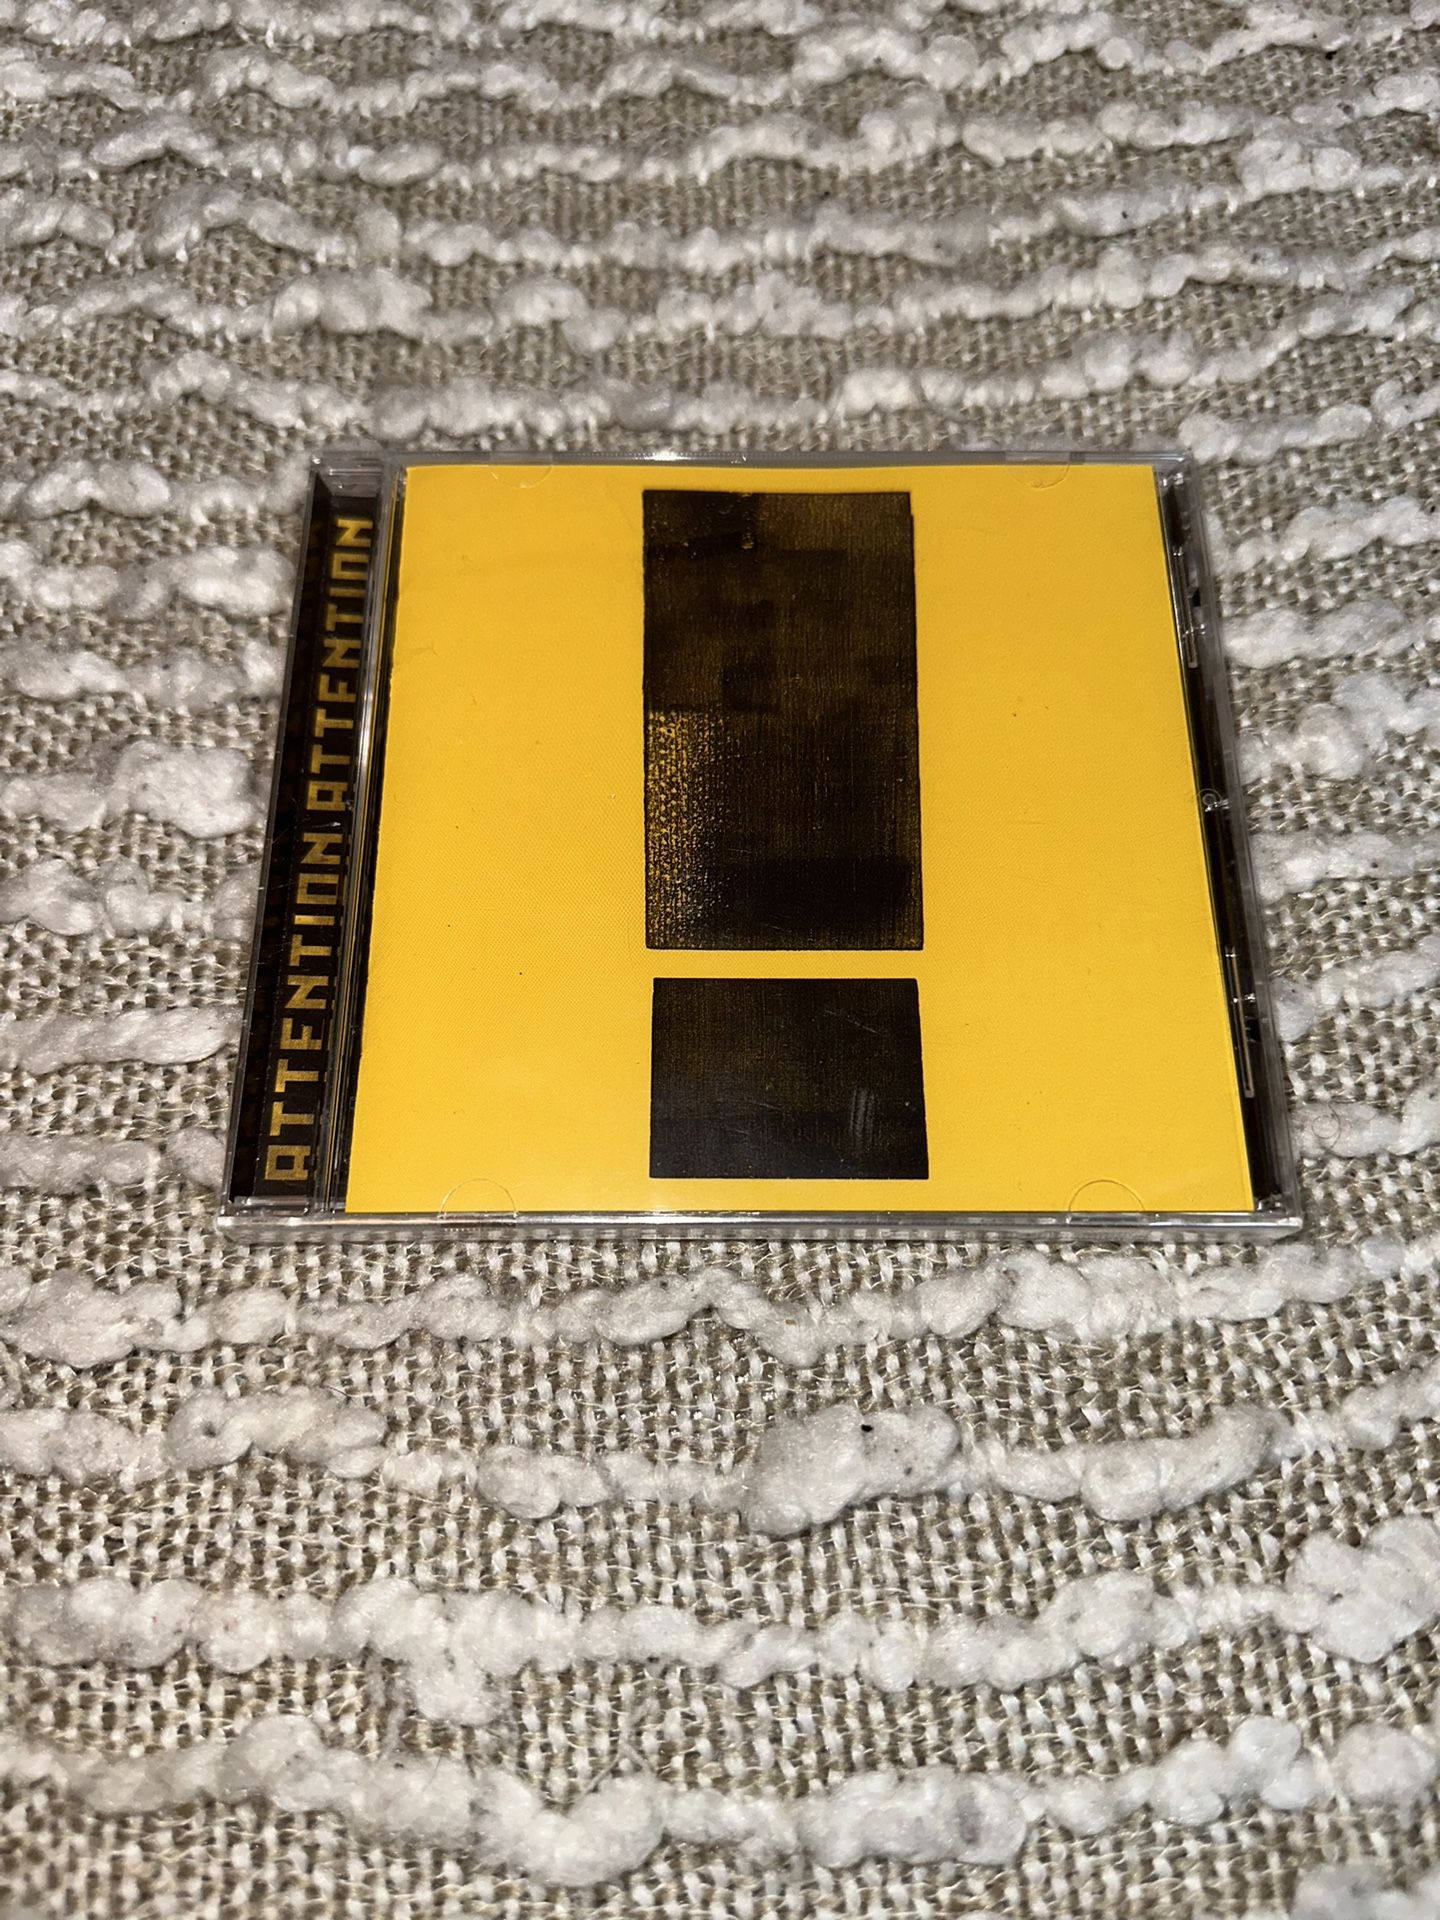 Attention Attention by Shinedown (CD, 2018)